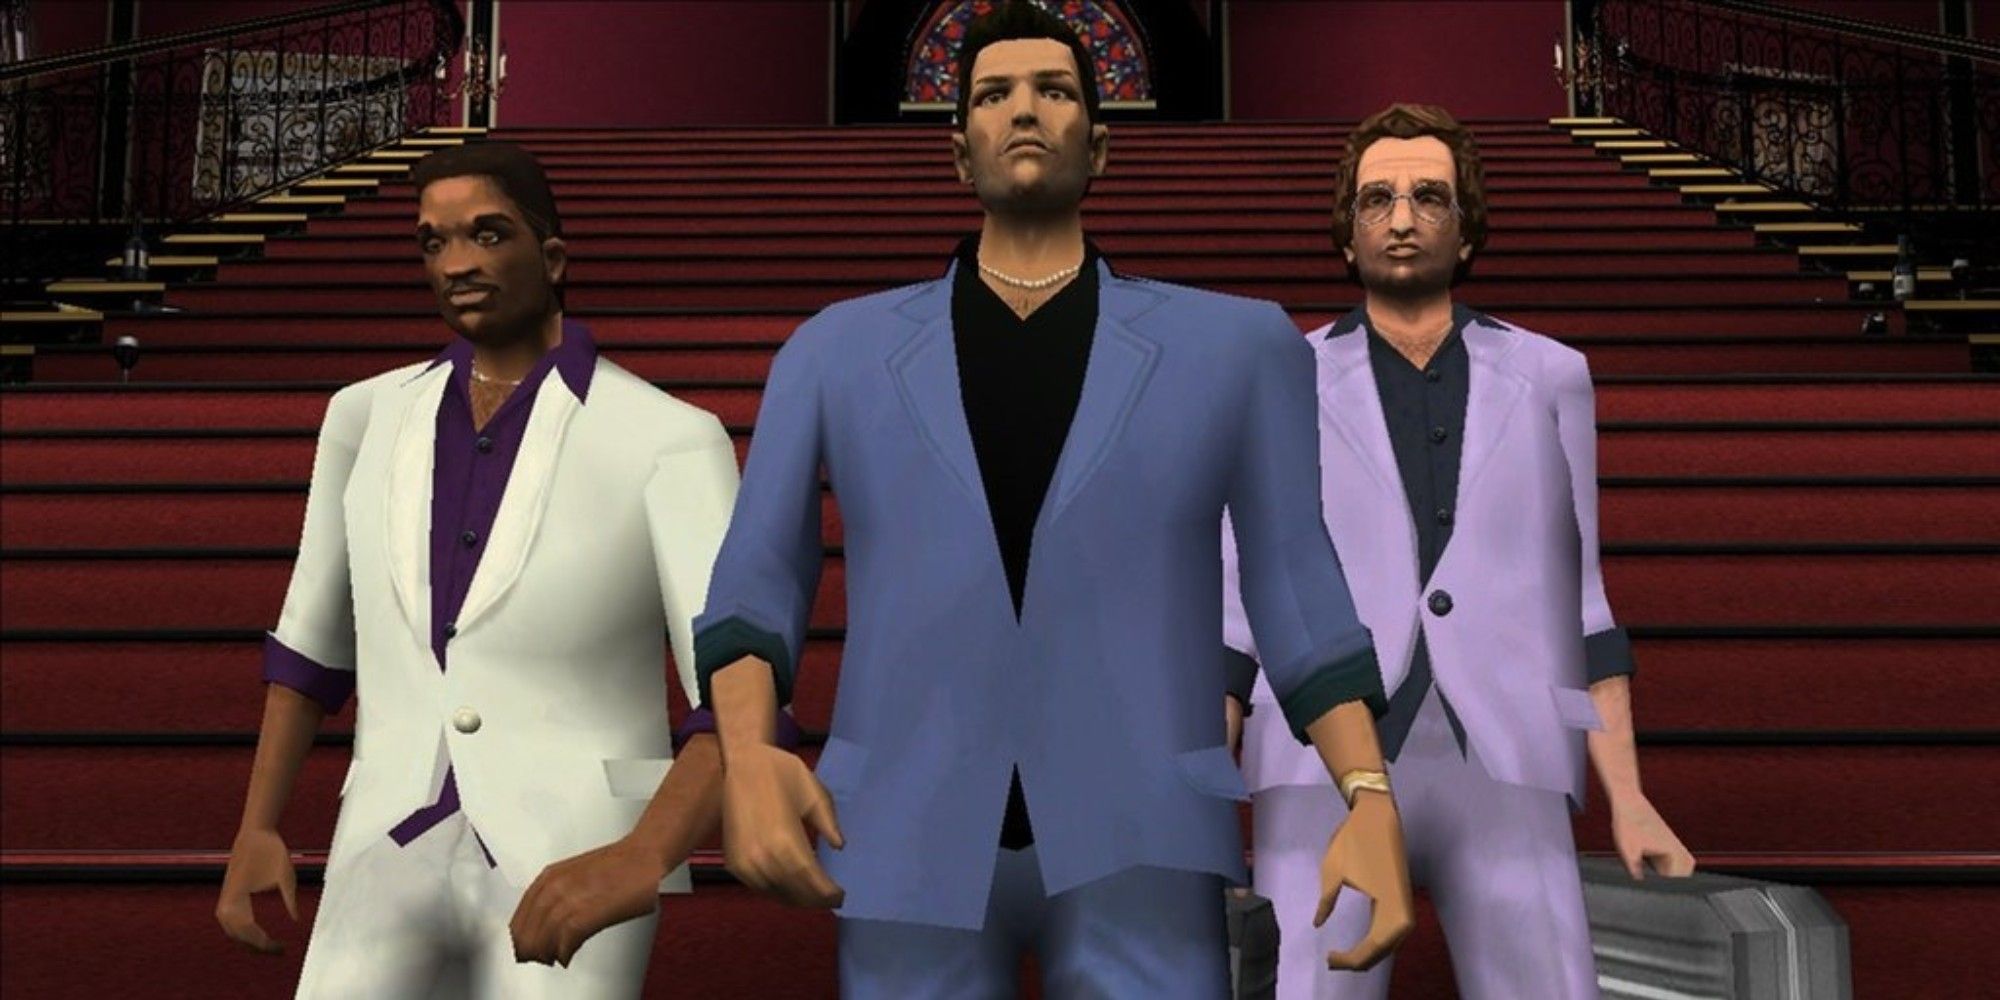 tommy vercetti crime lord vice city